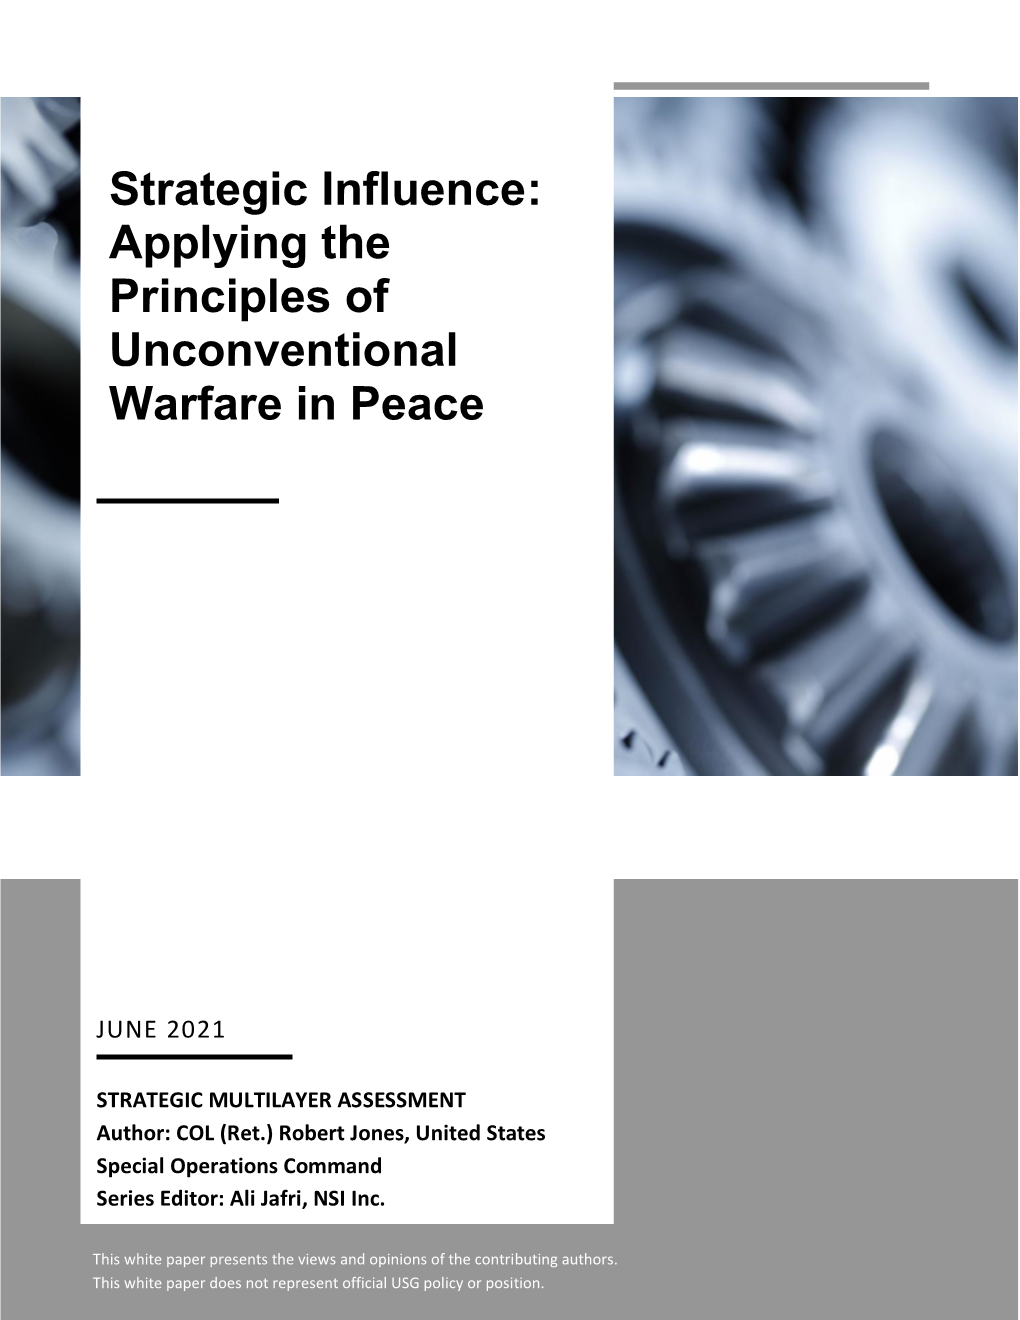 Strategic Influence: Applying the Principles of Unconventional Warfare in Peace